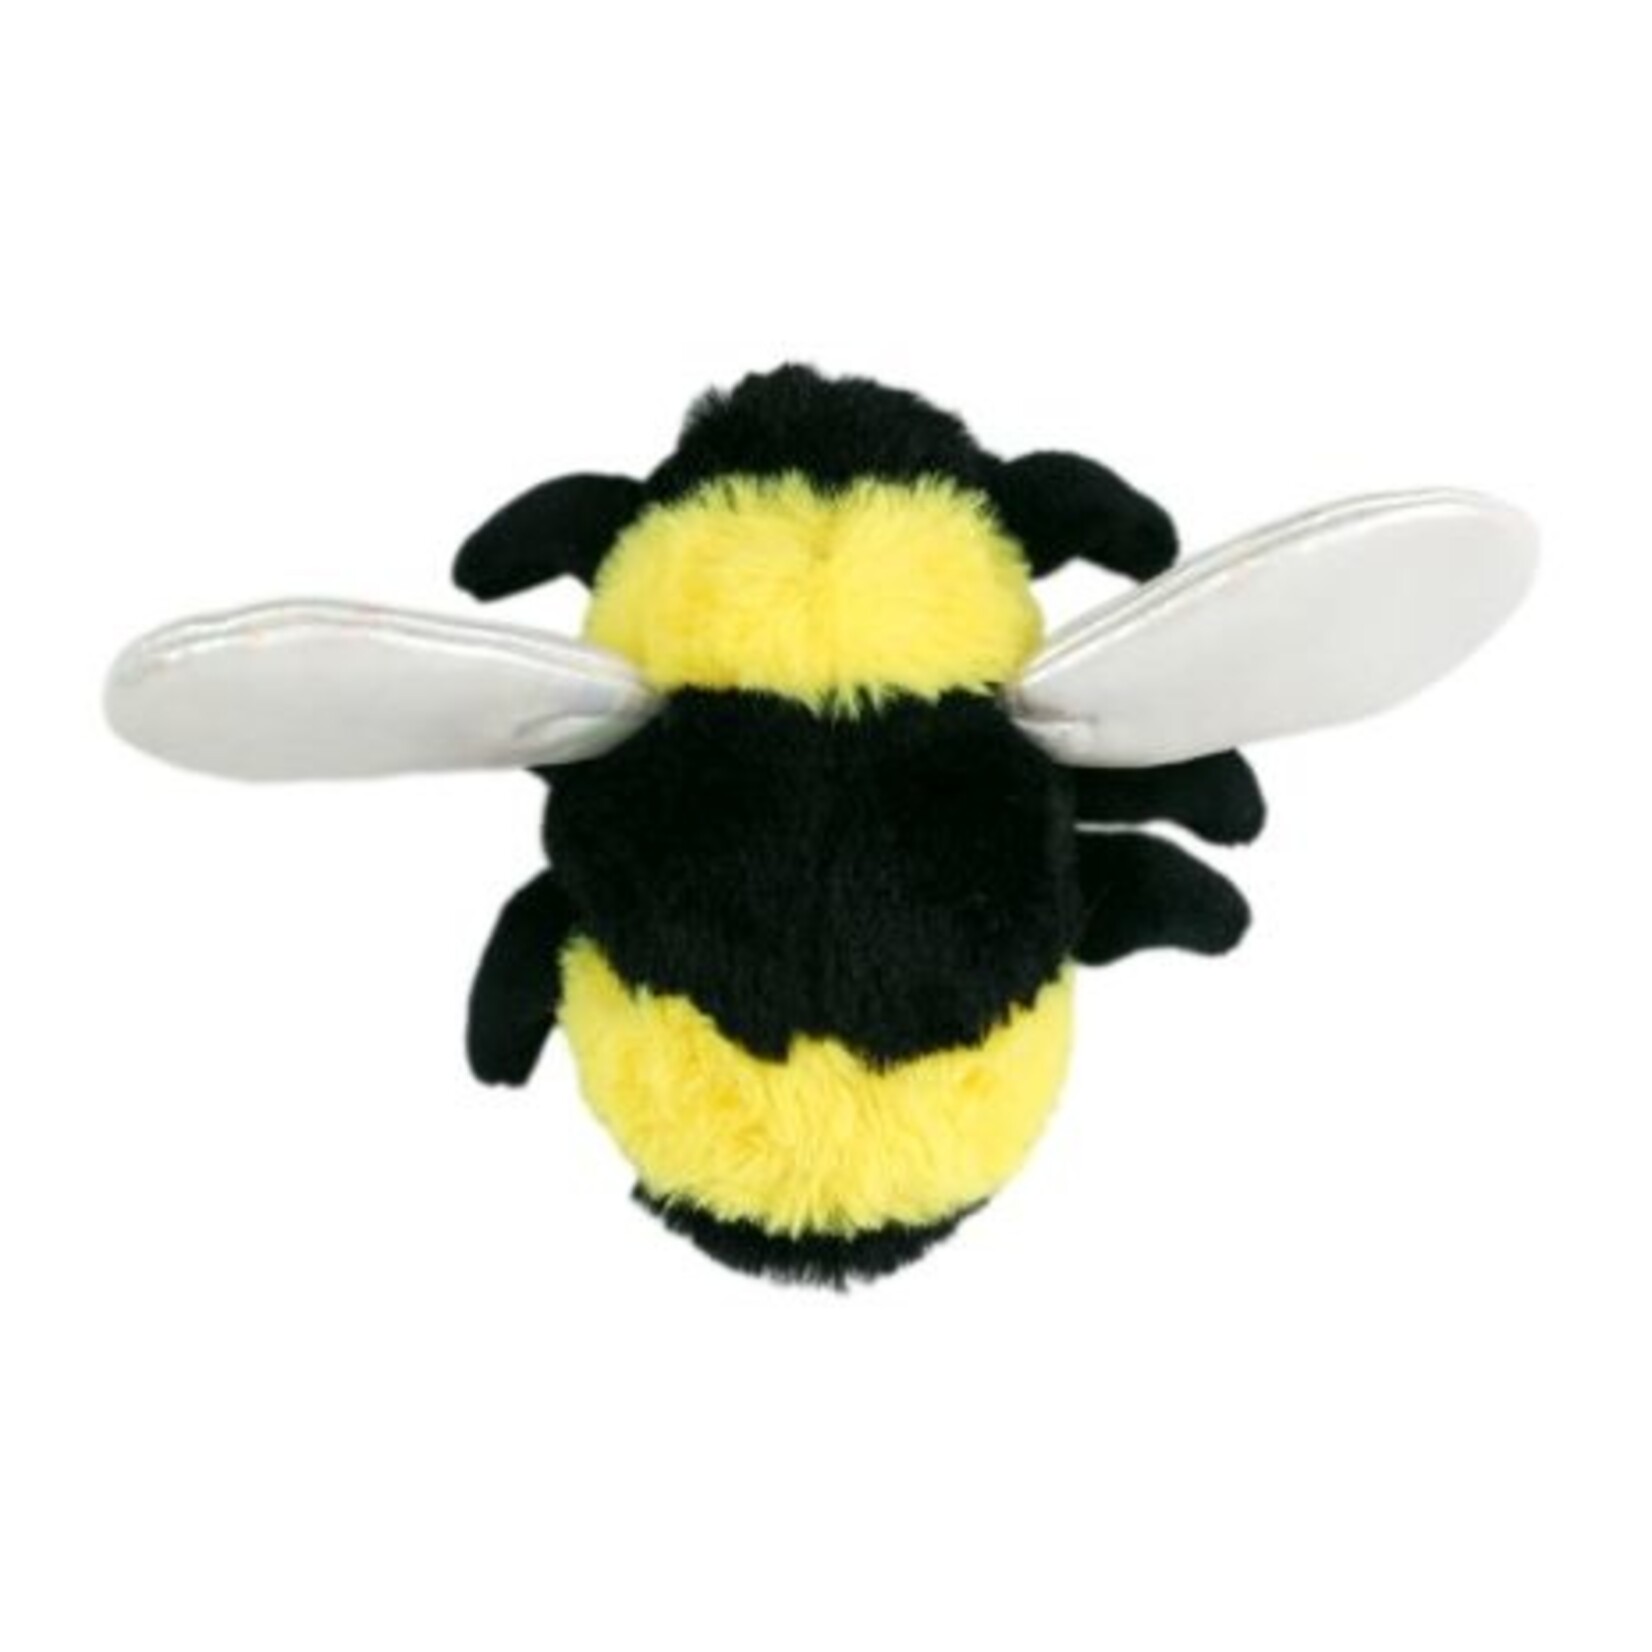 Tall Tails Tall Tails Bee with Squeaker 5"